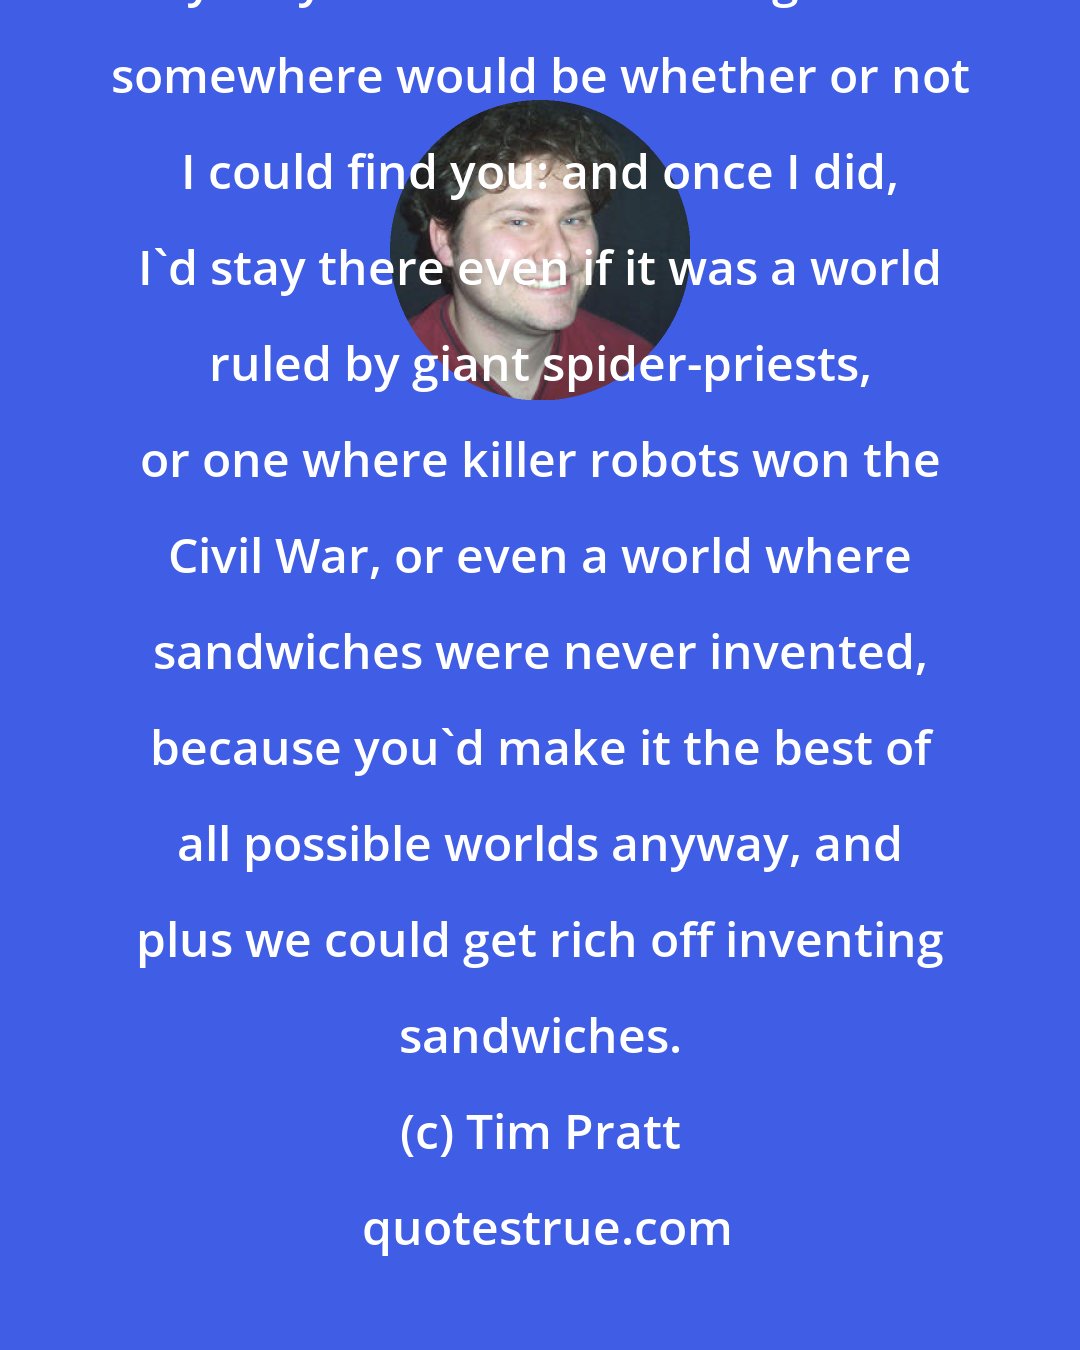 Tim Pratt: If I became lost in the multiverse, exploring infinite parallel dimensions, my only criterion for settling down somewhere would be whether or not I could find you: and once I did, I'd stay there even if it was a world ruled by giant spider-priests, or one where killer robots won the Civil War, or even a world where sandwiches were never invented, because you'd make it the best of all possible worlds anyway, and plus we could get rich off inventing sandwiches.